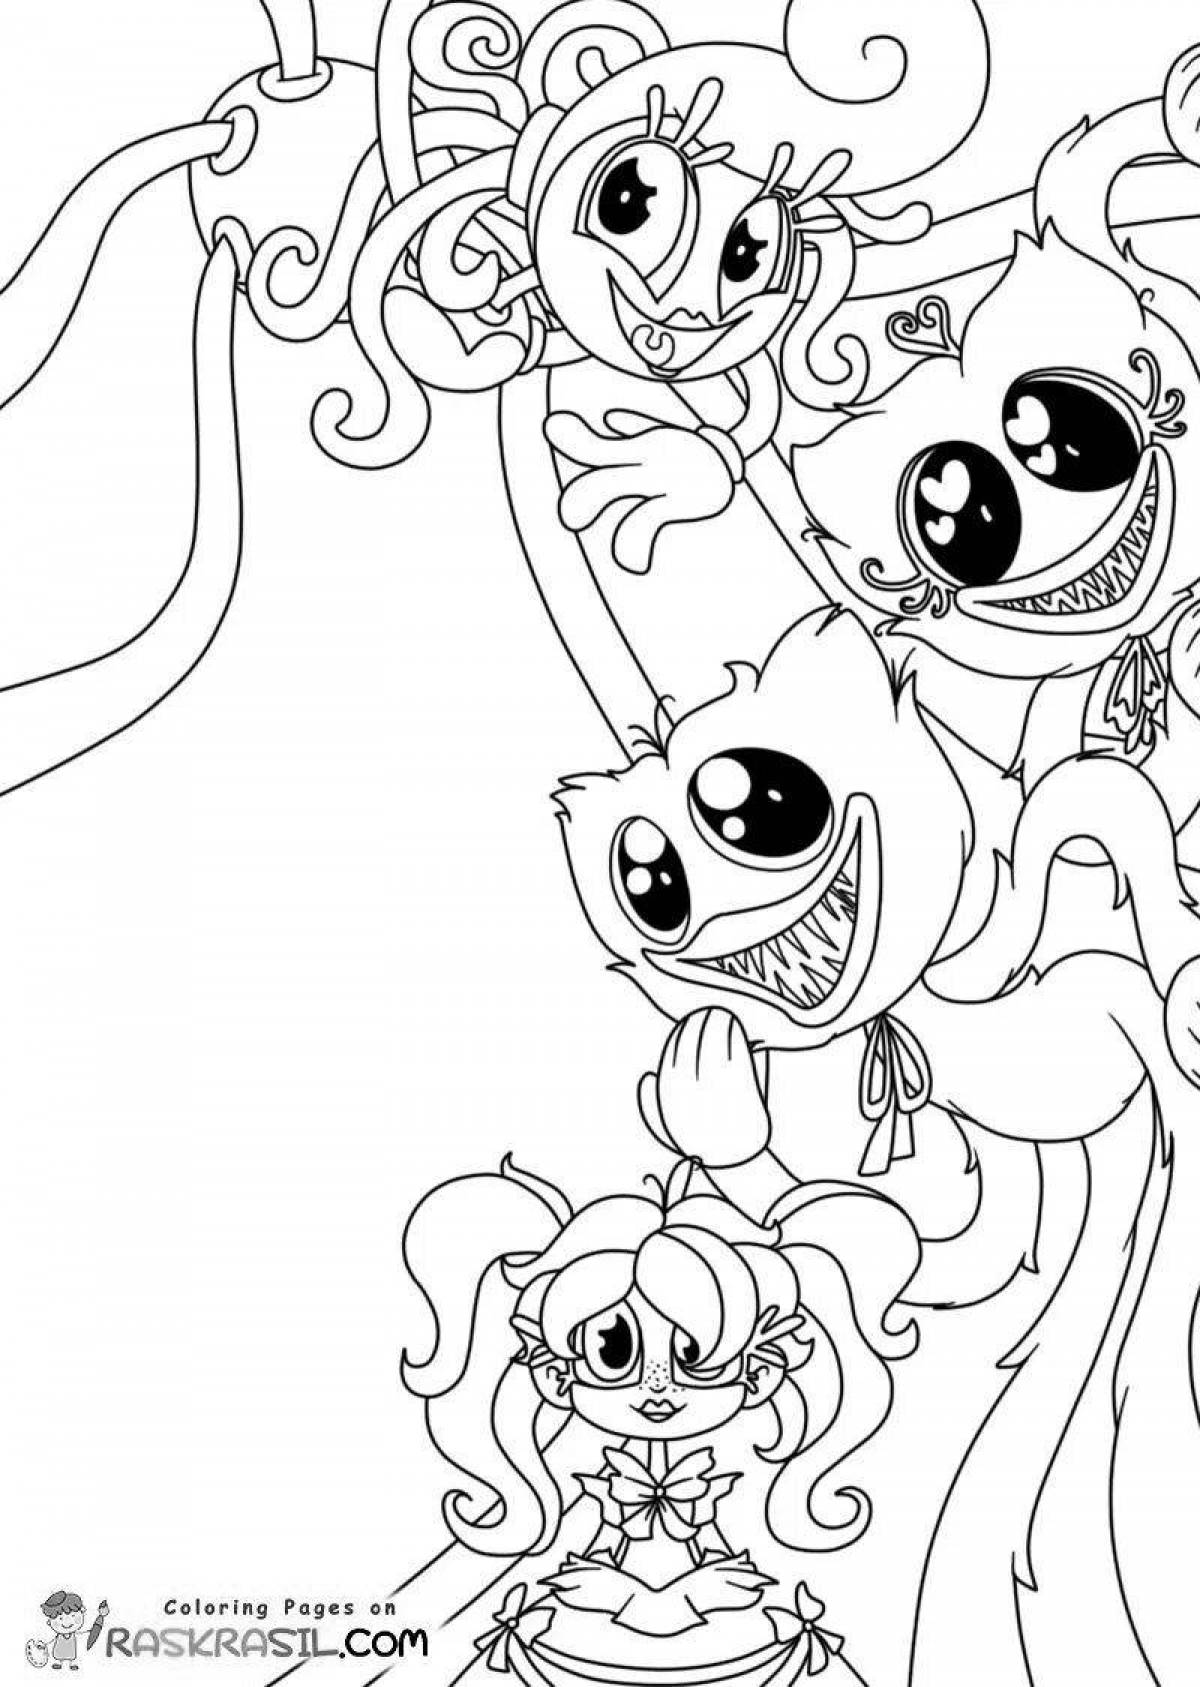 Vivacious pony playtime coloring page